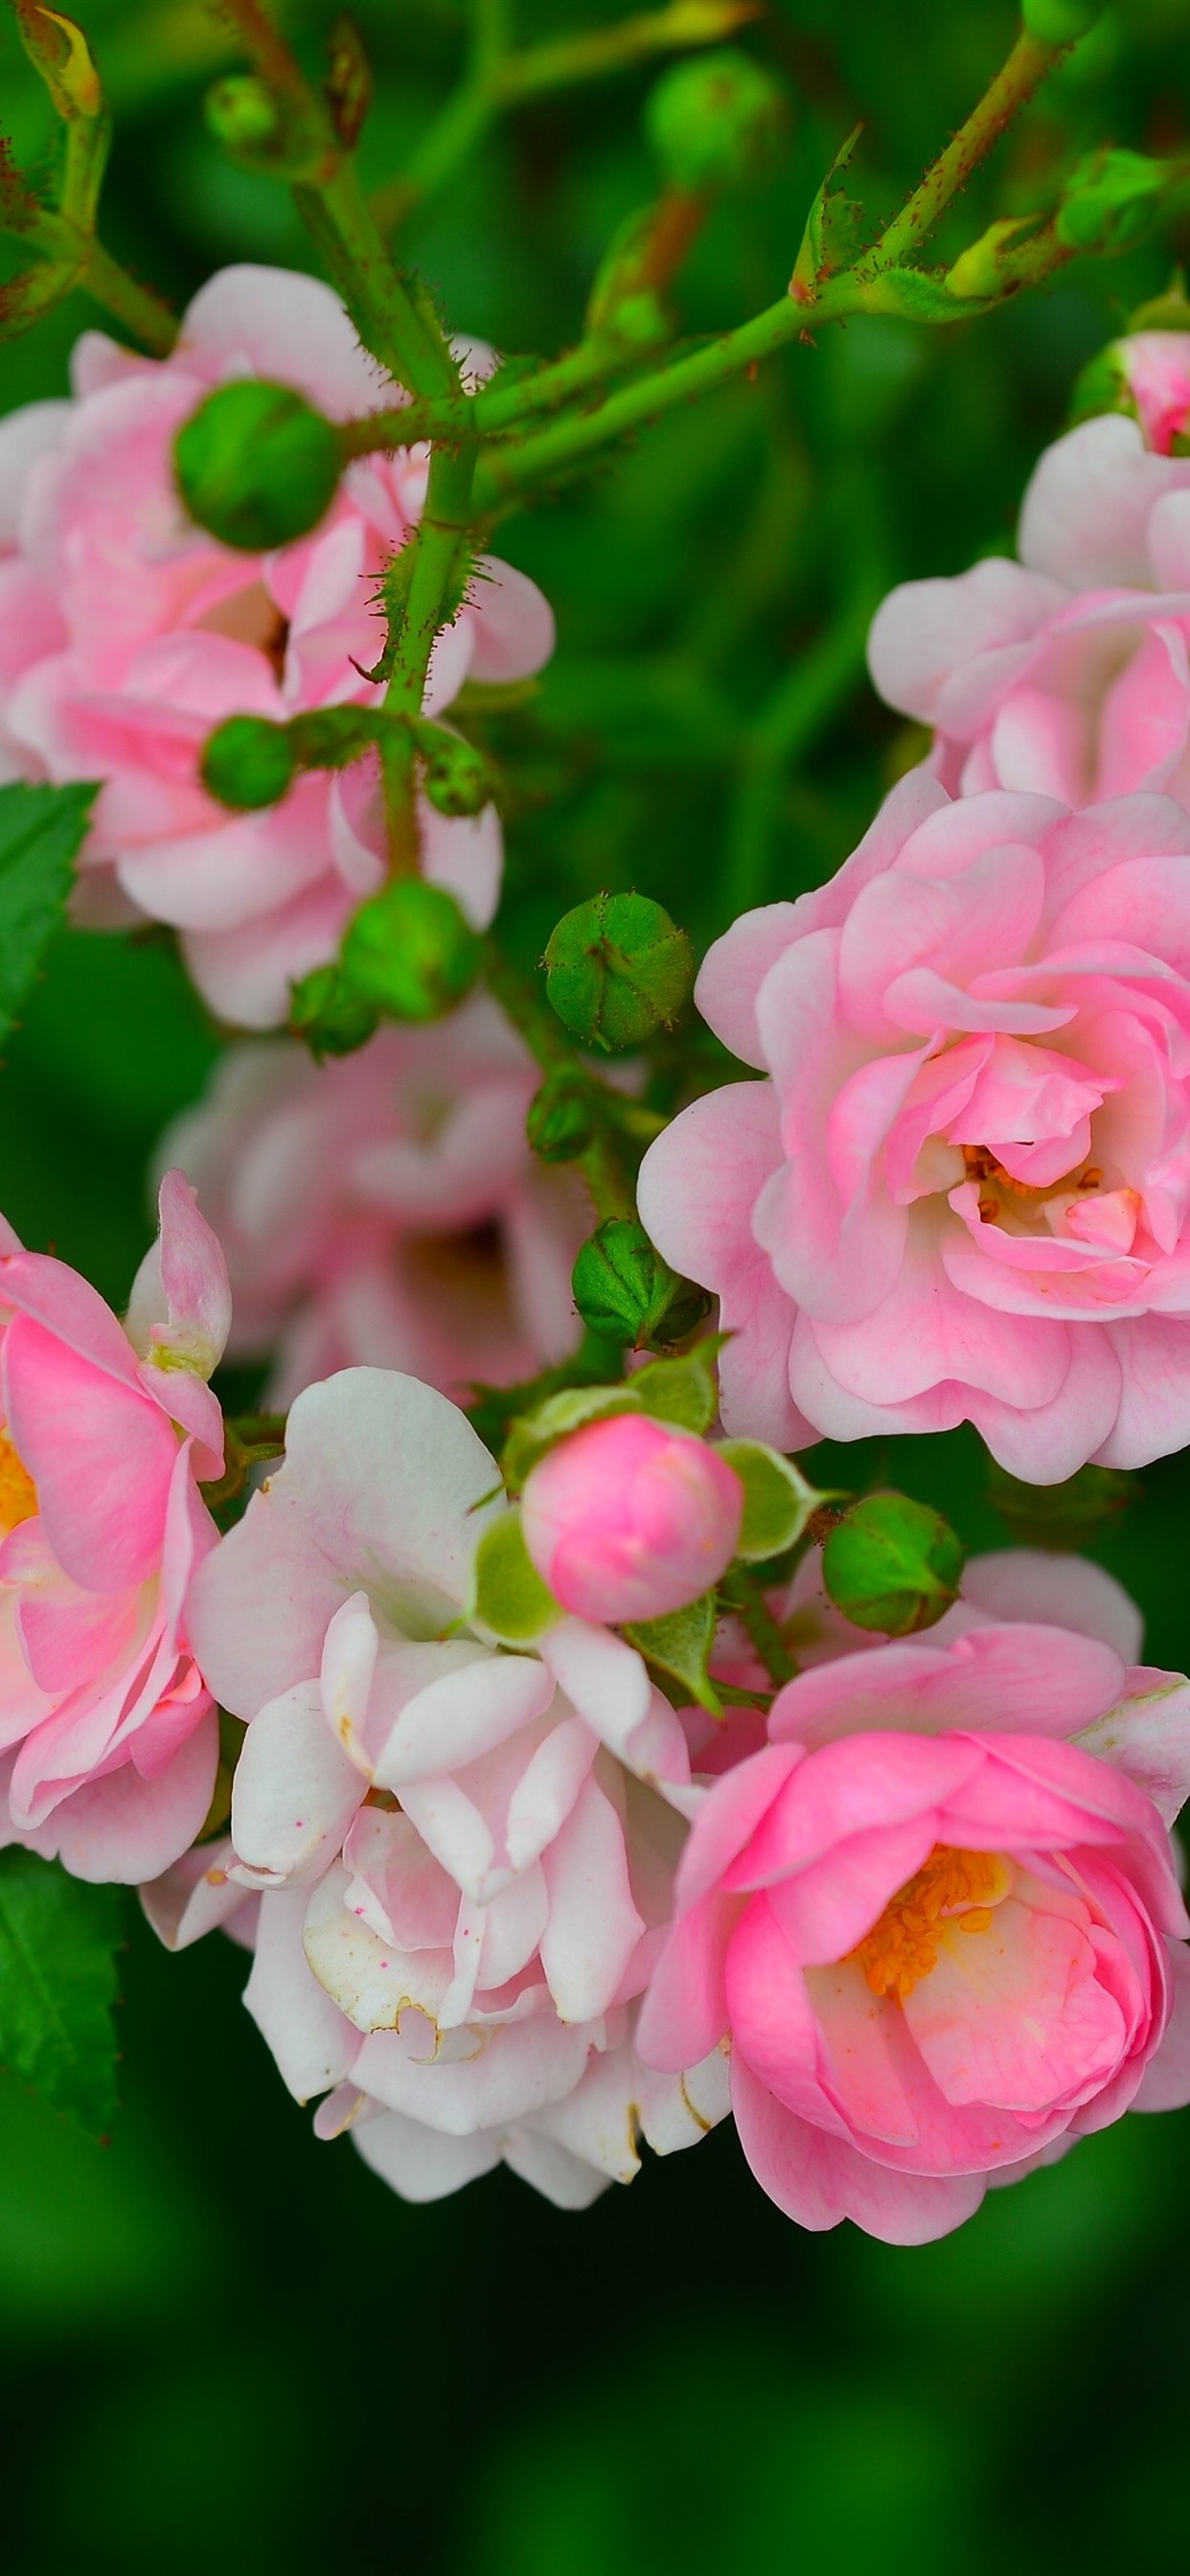 Some pink roses green leaves spring x iphone proxs max wallpaper background picture image